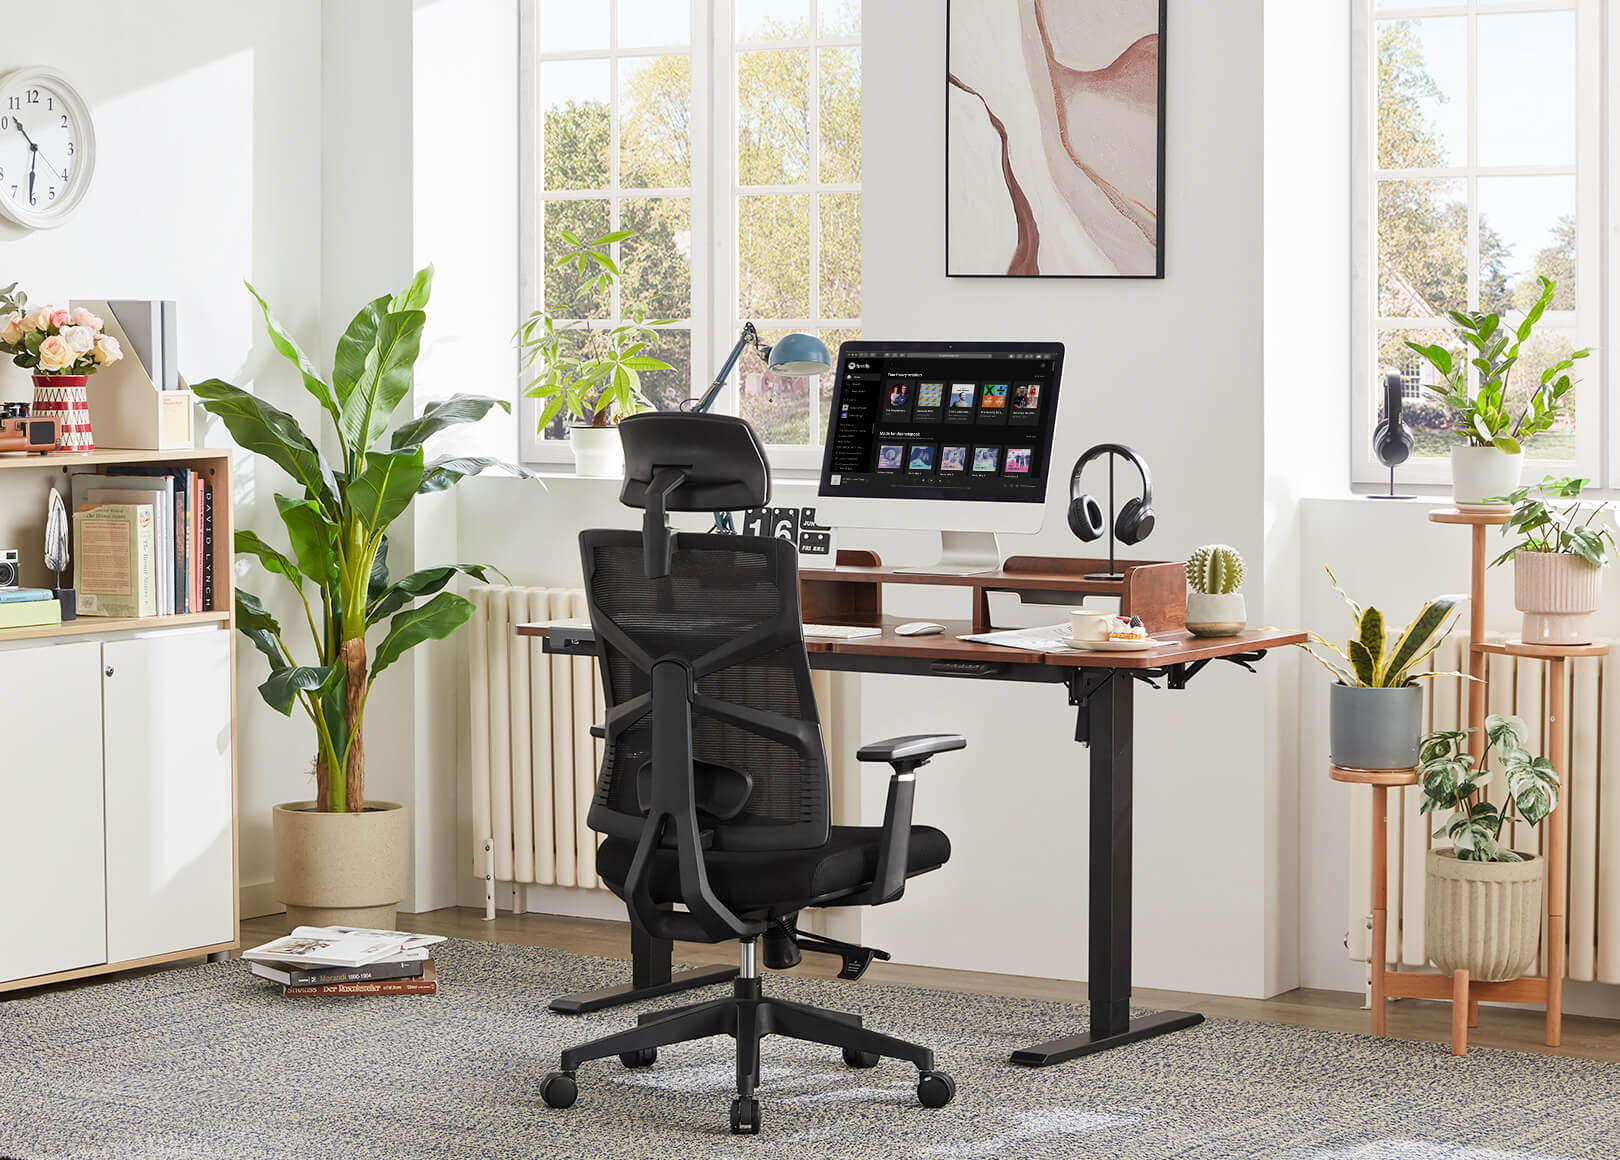 Maximize your productivity with the Black Voyager Pro Ergonomic Task Chair for Home Office, equipped with 3D Armrests, Lockable Backrest, and Lumbar Support